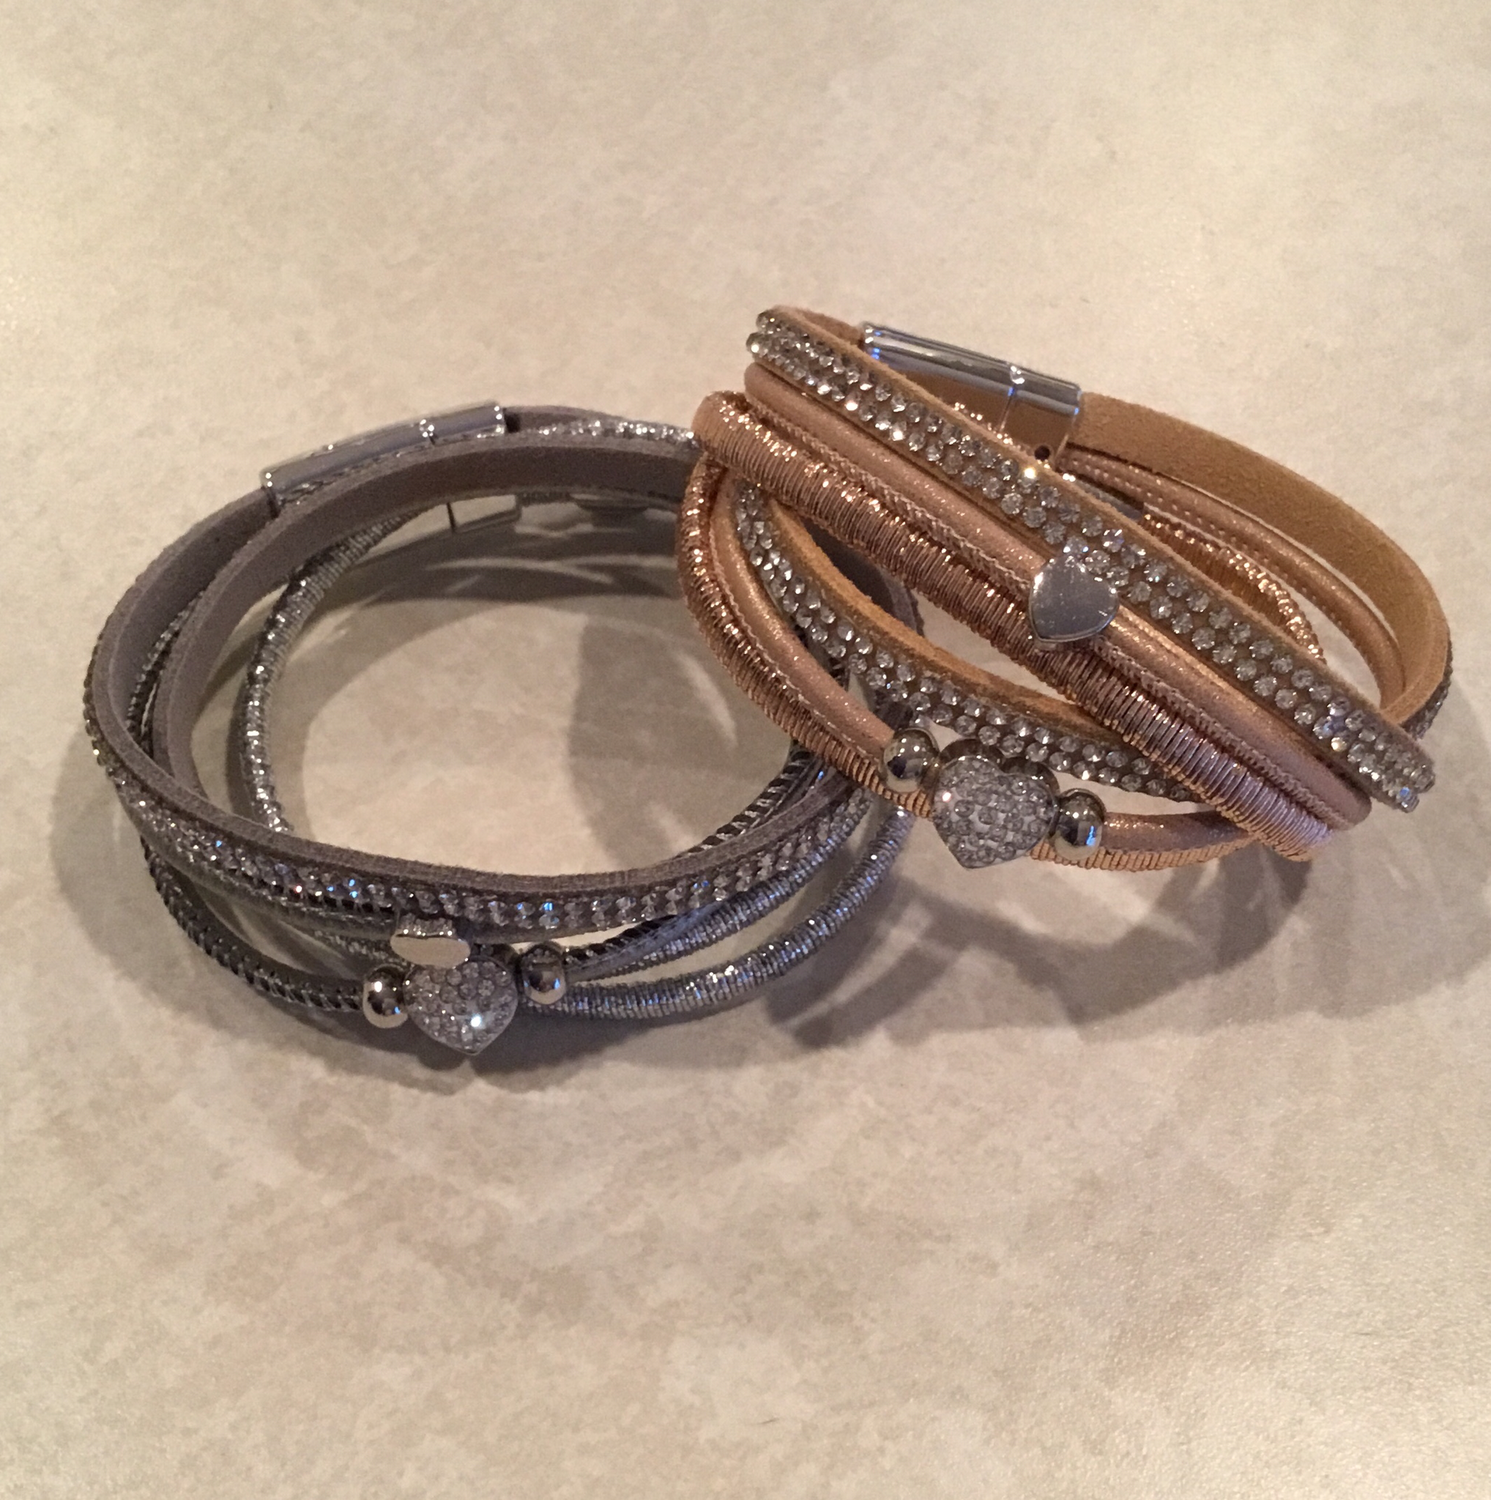 Leather Wrap Bracelet With Heart Bling in Dark Gray or Tan.